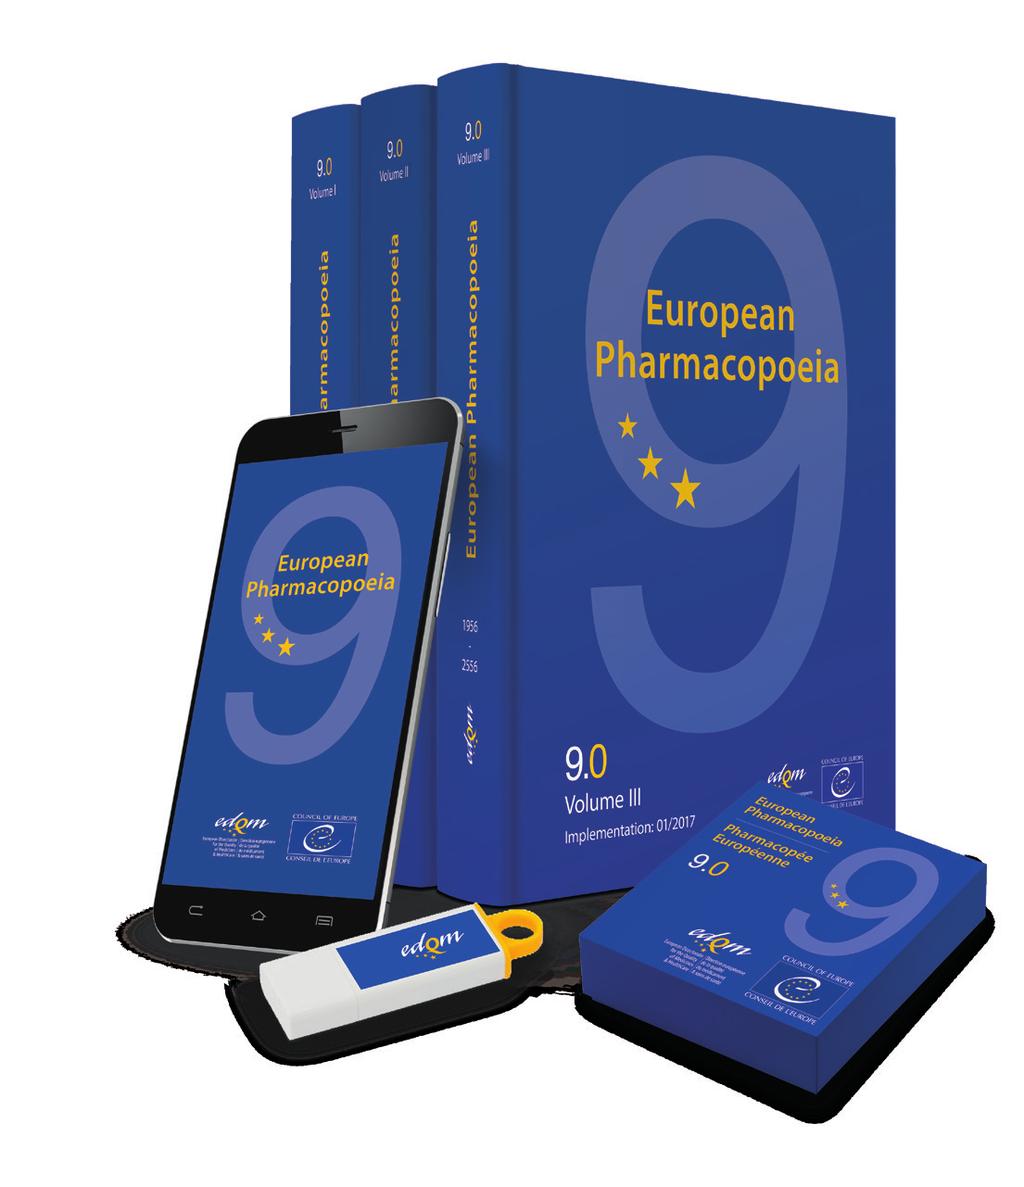 eu/techguides CombiStats : statistical analysis software computer program for calculations in accordance with chapter 5.3 of the European Pharmacopoeia.